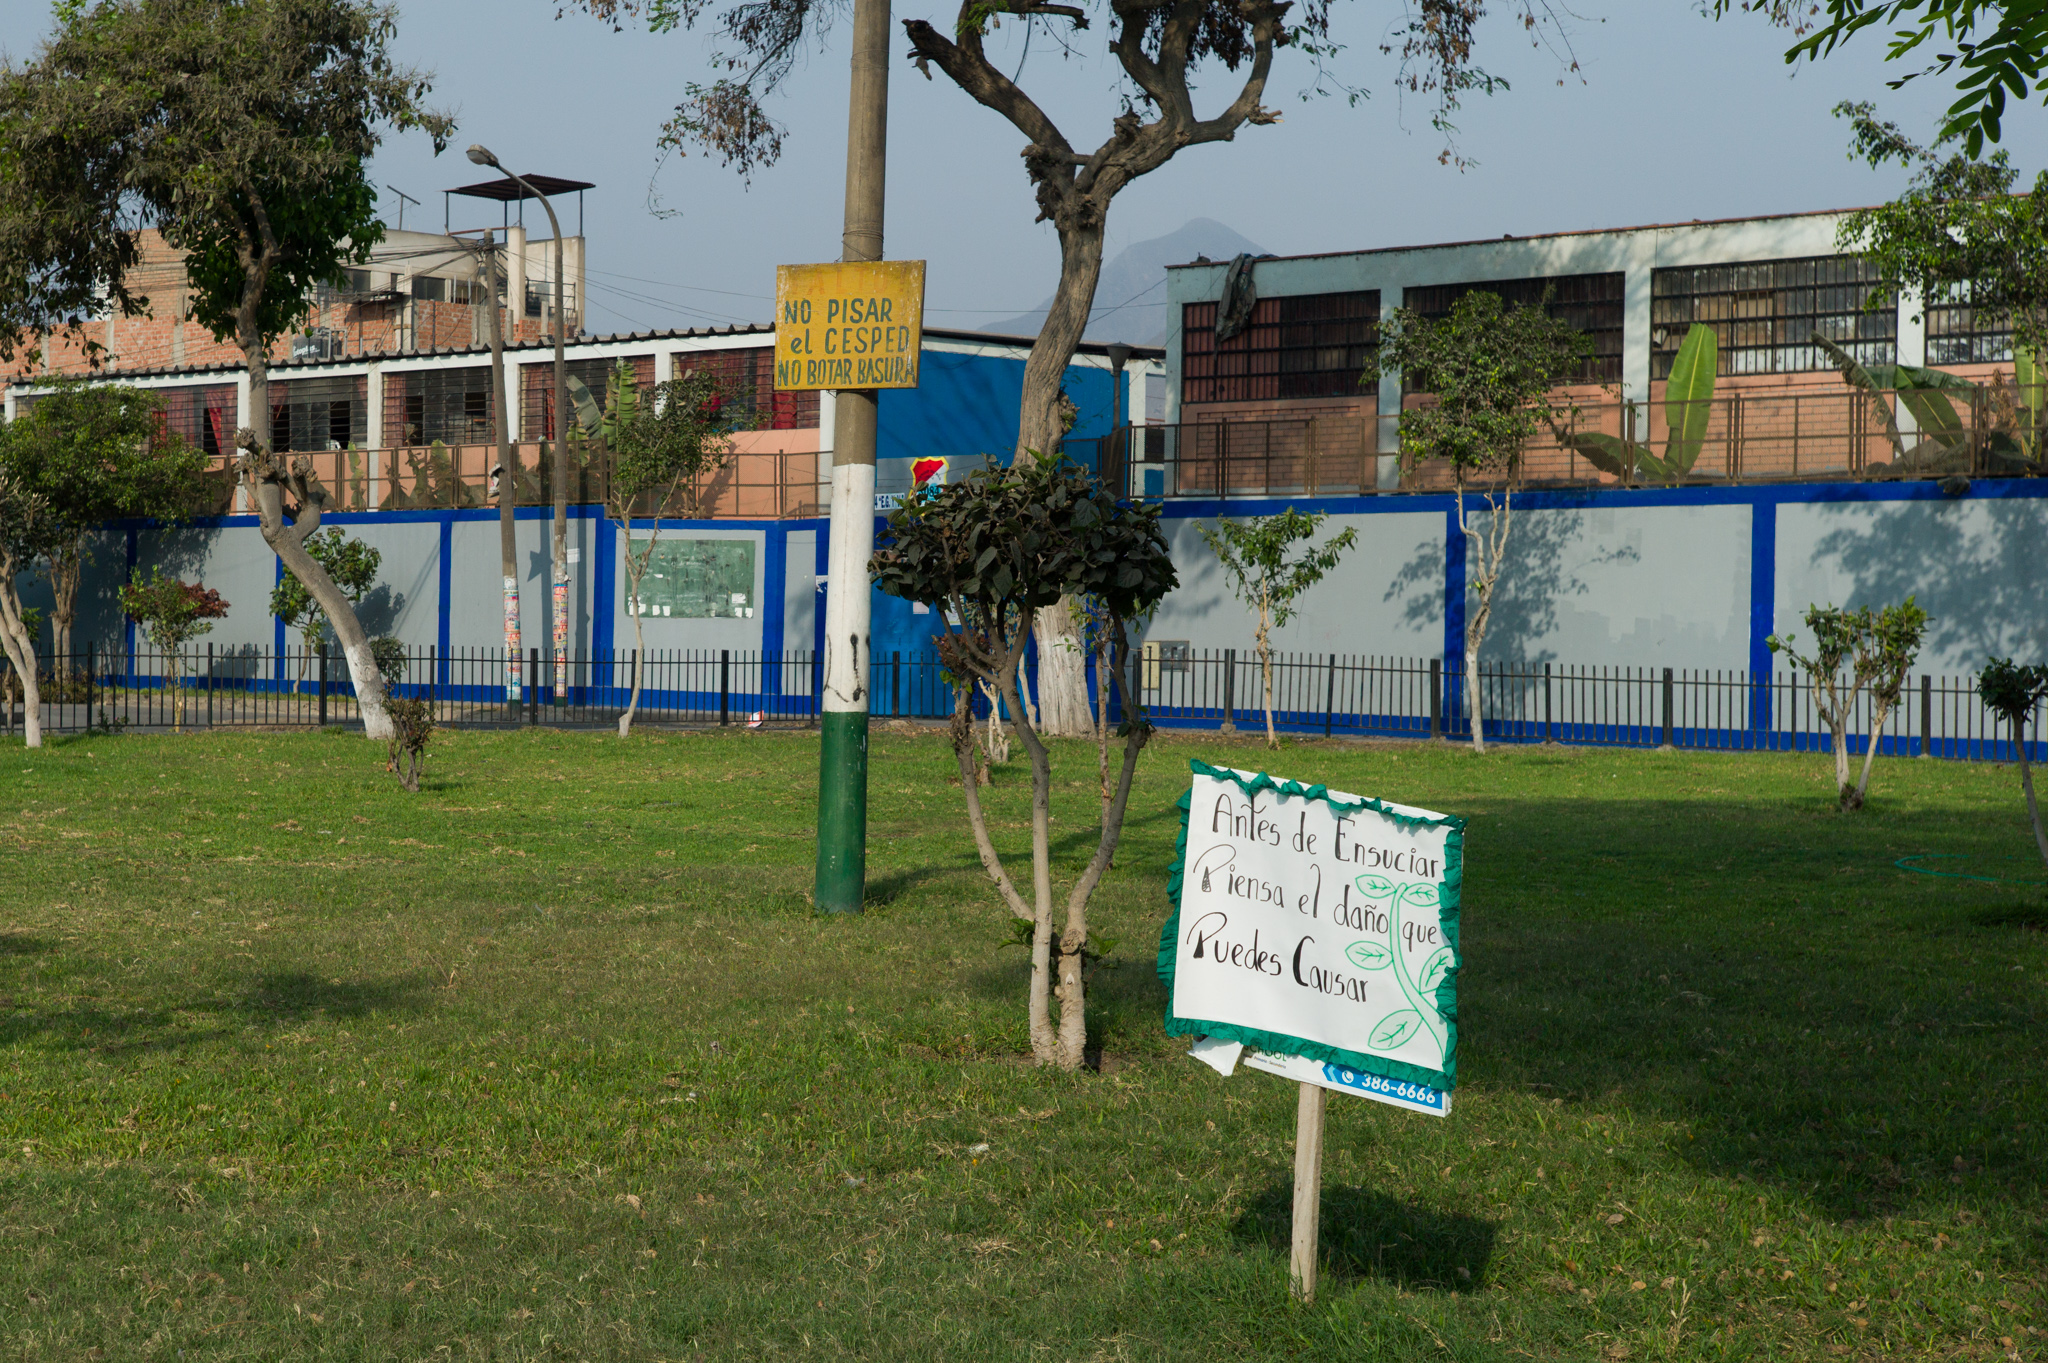  Another fenced park. The white sign reads "before making a mess, think of the damage you might cause." 